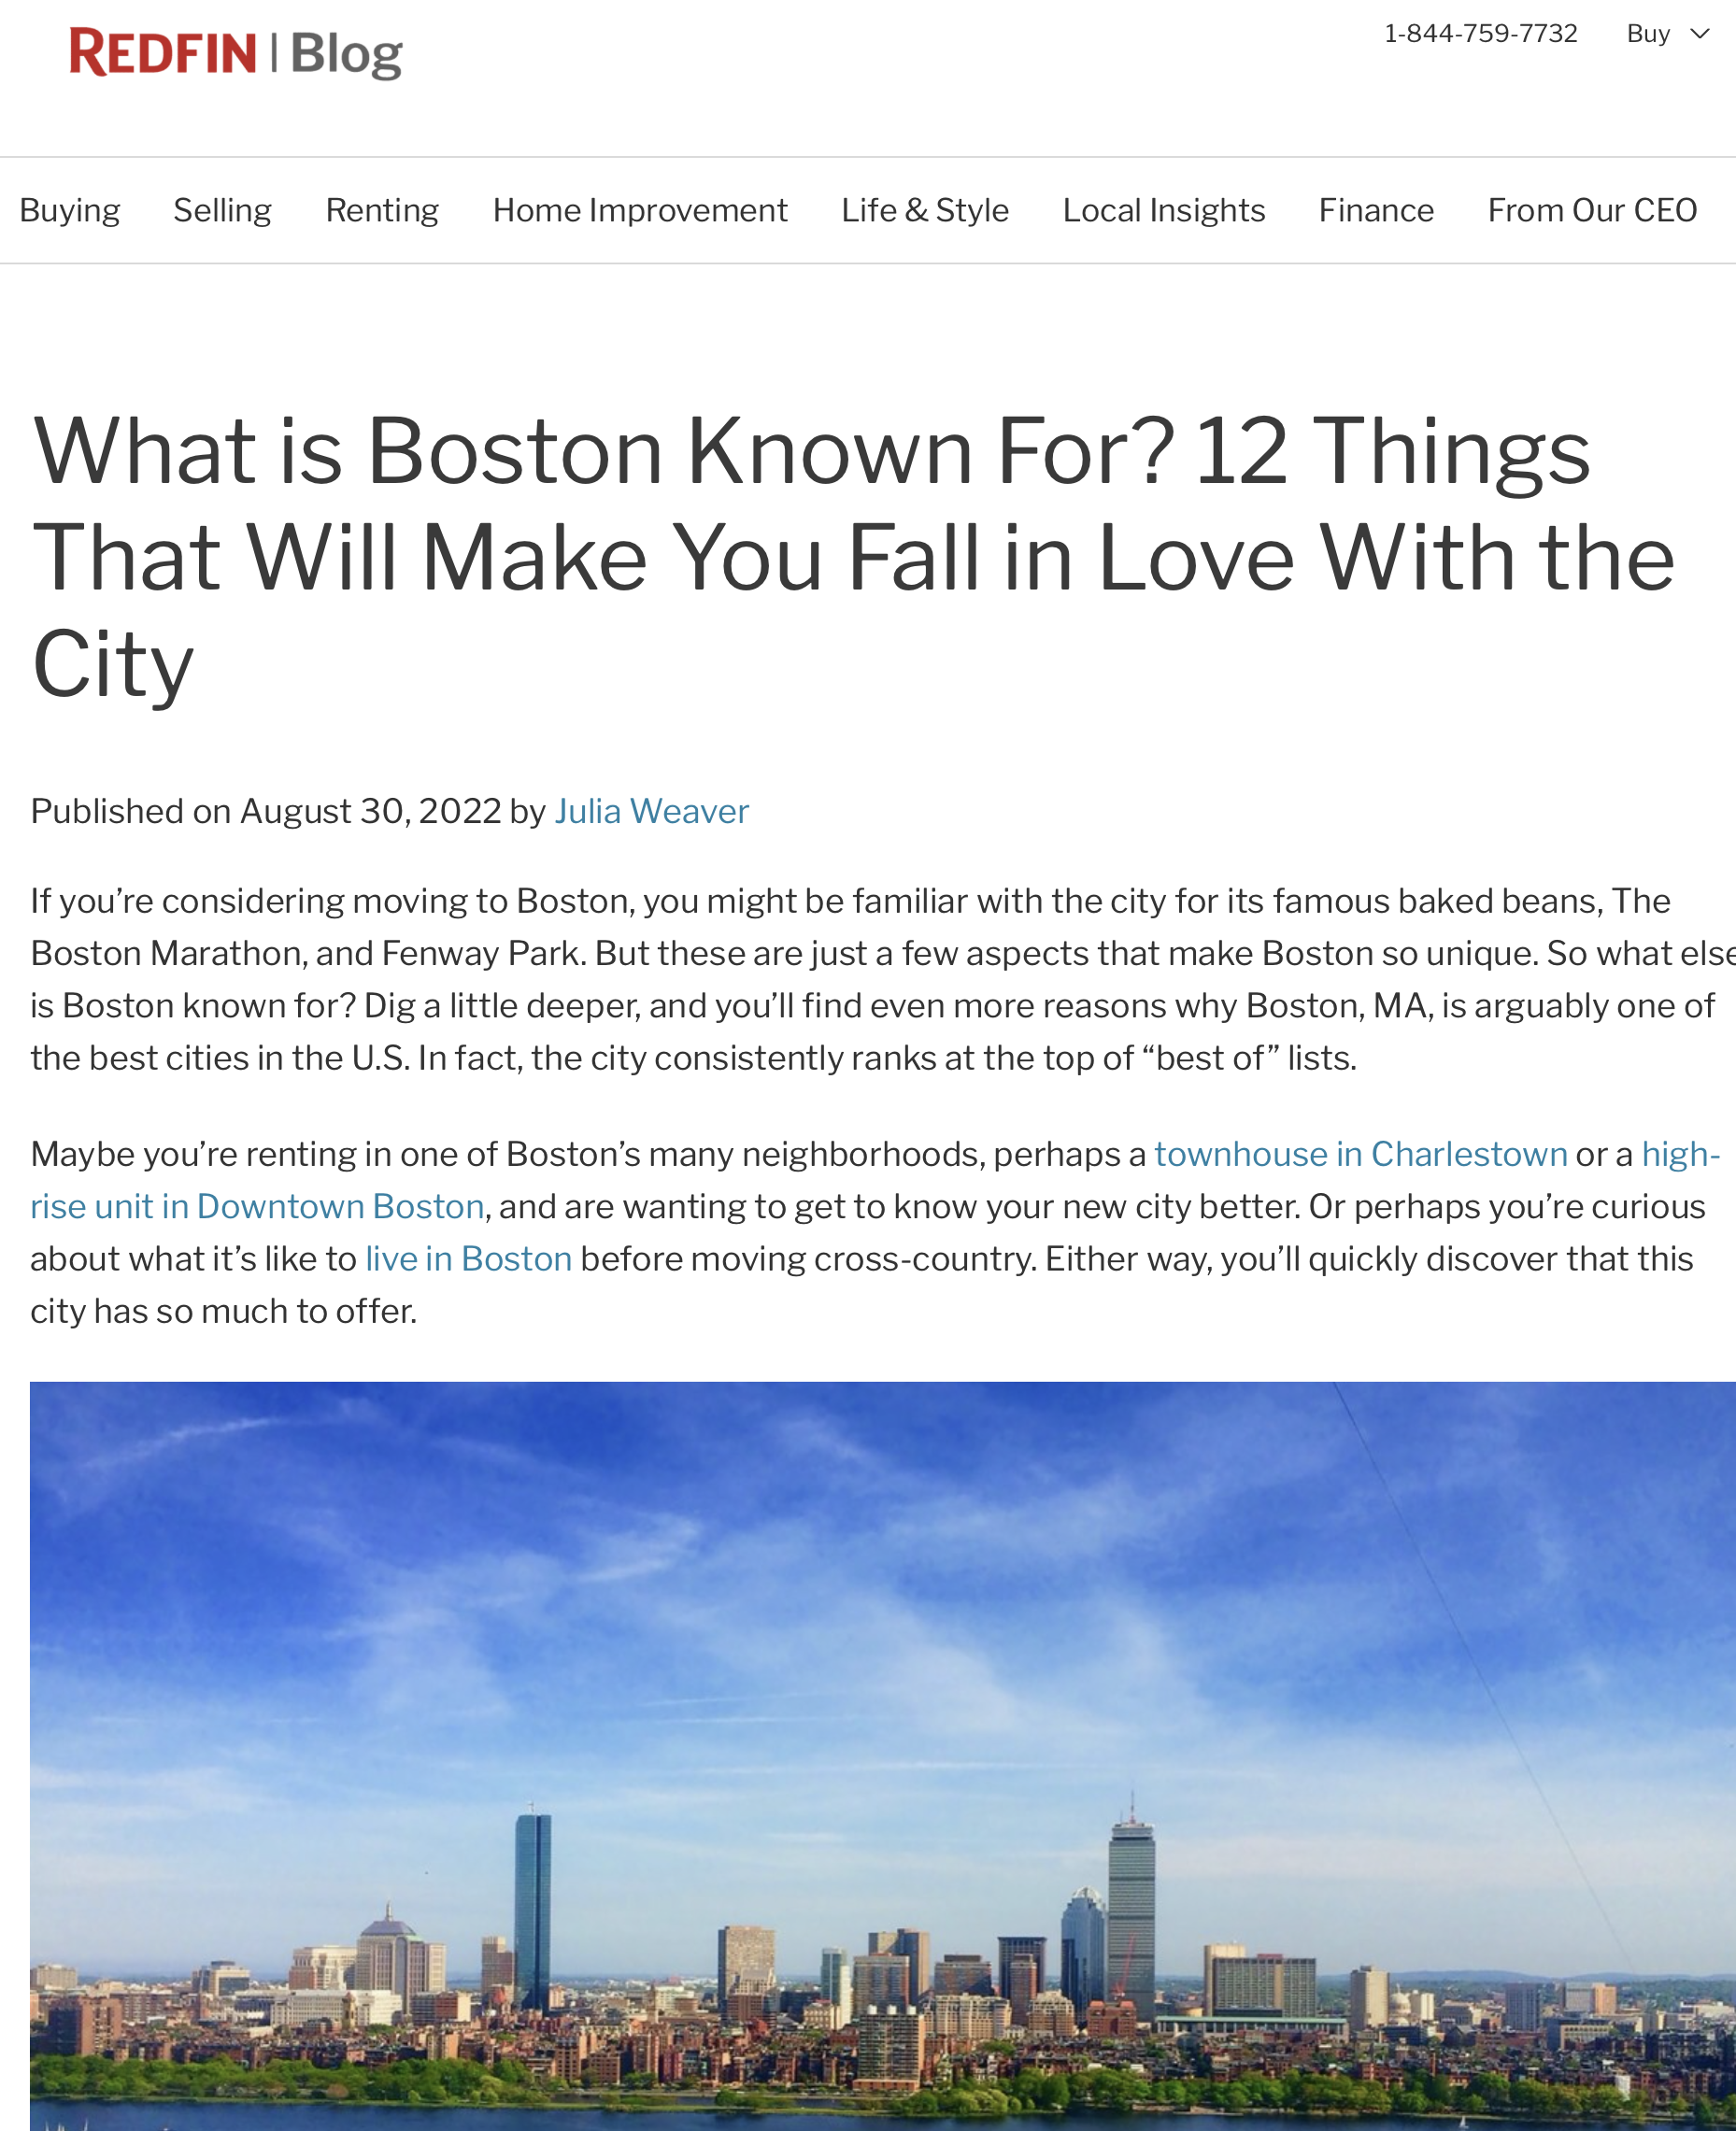 What is Boston Known For? 12 Things That Will Make You Fall in Love With the City